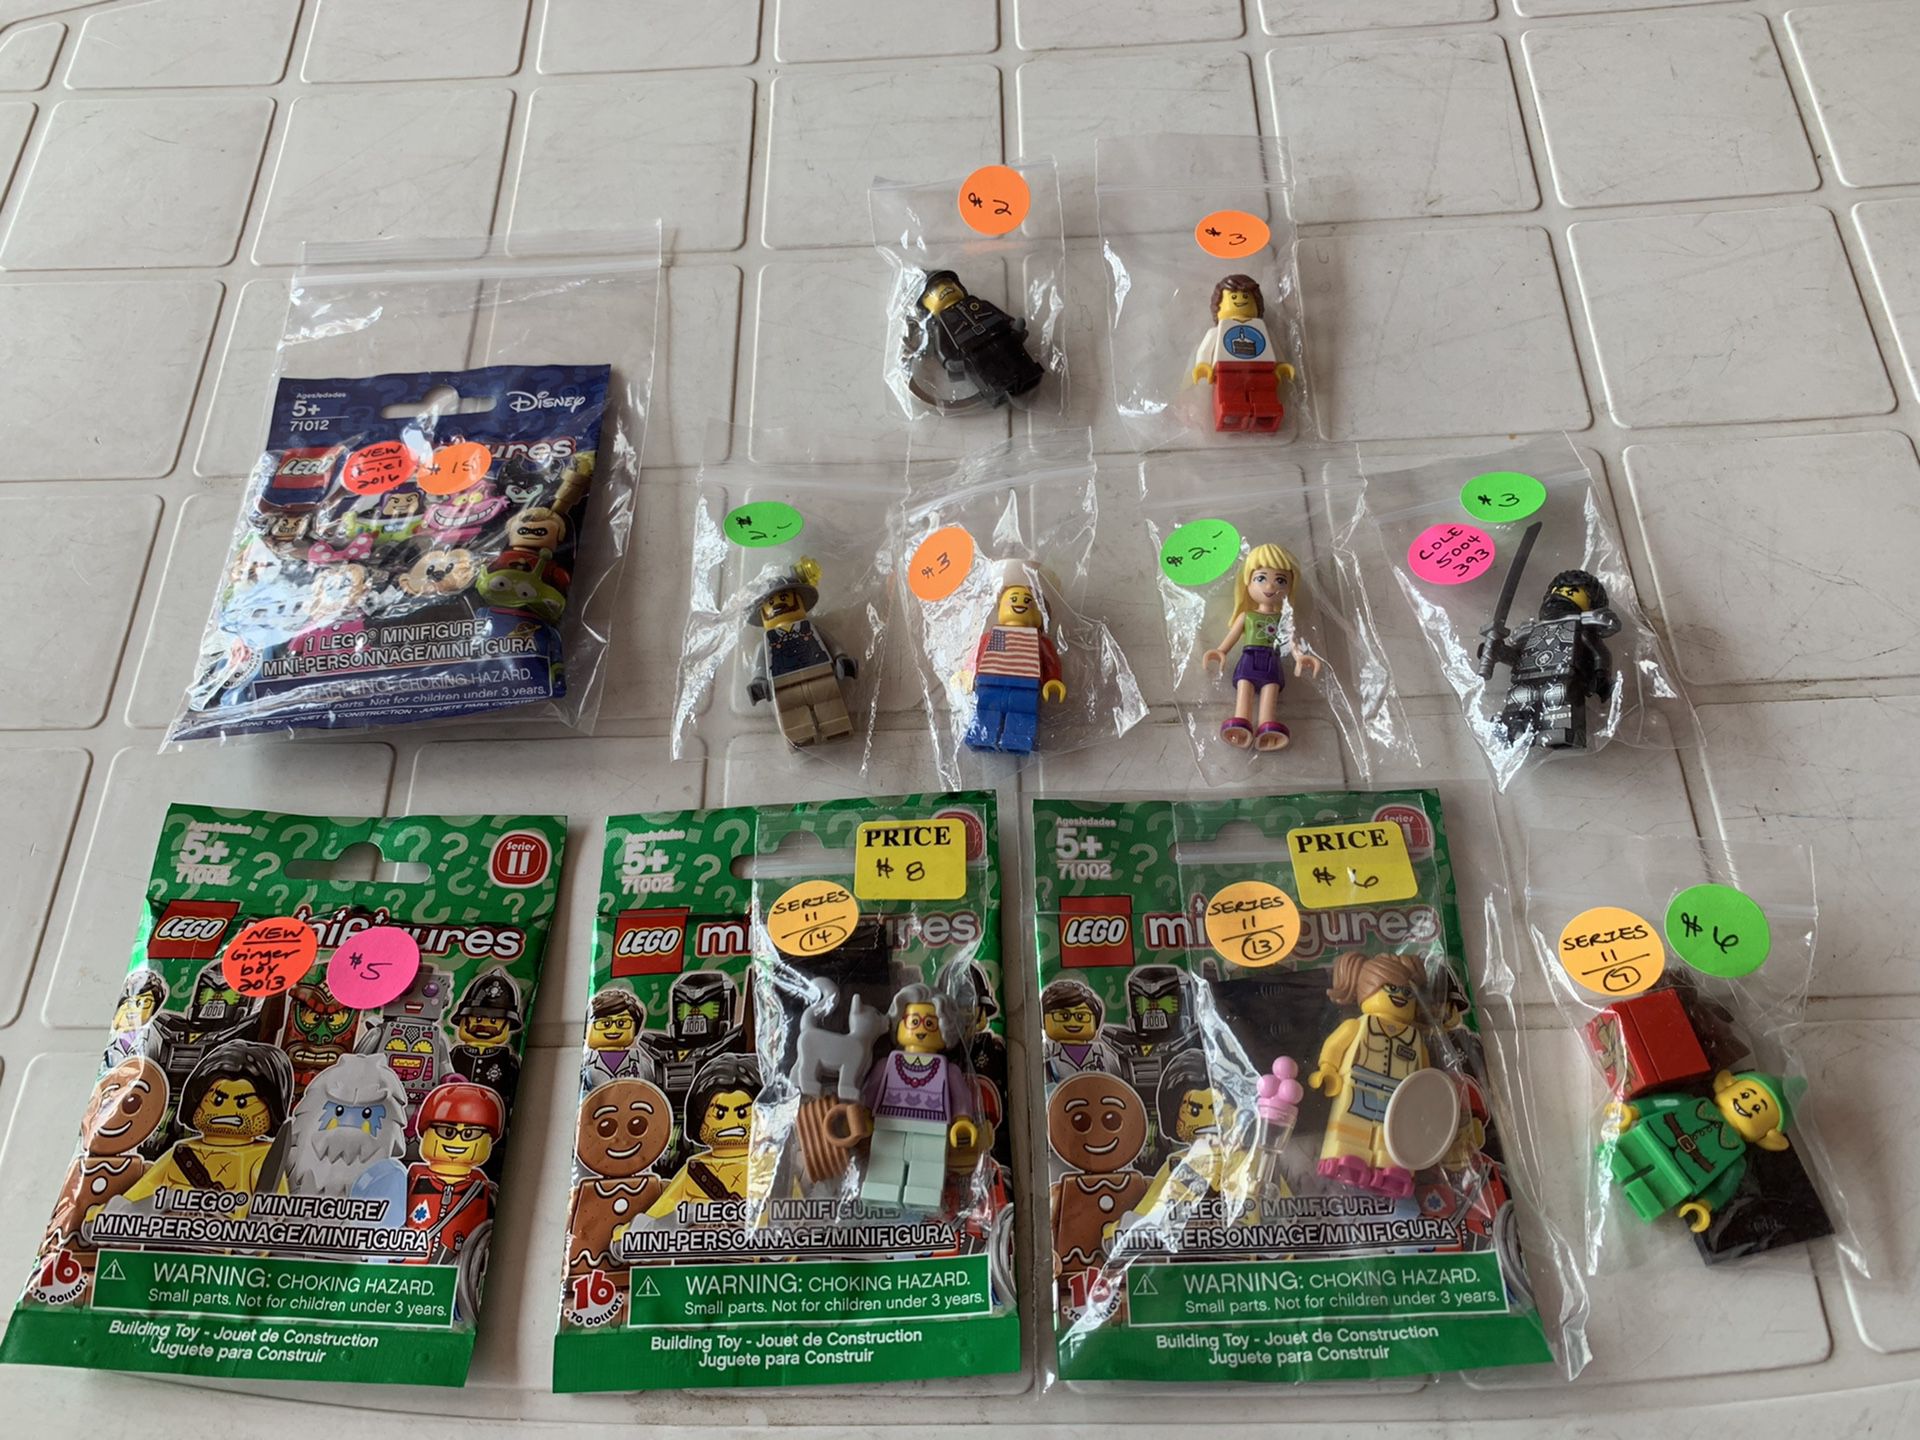 LEGO Minifigures $2 - $15 each or All for $40 Includes 1 keychain figure.